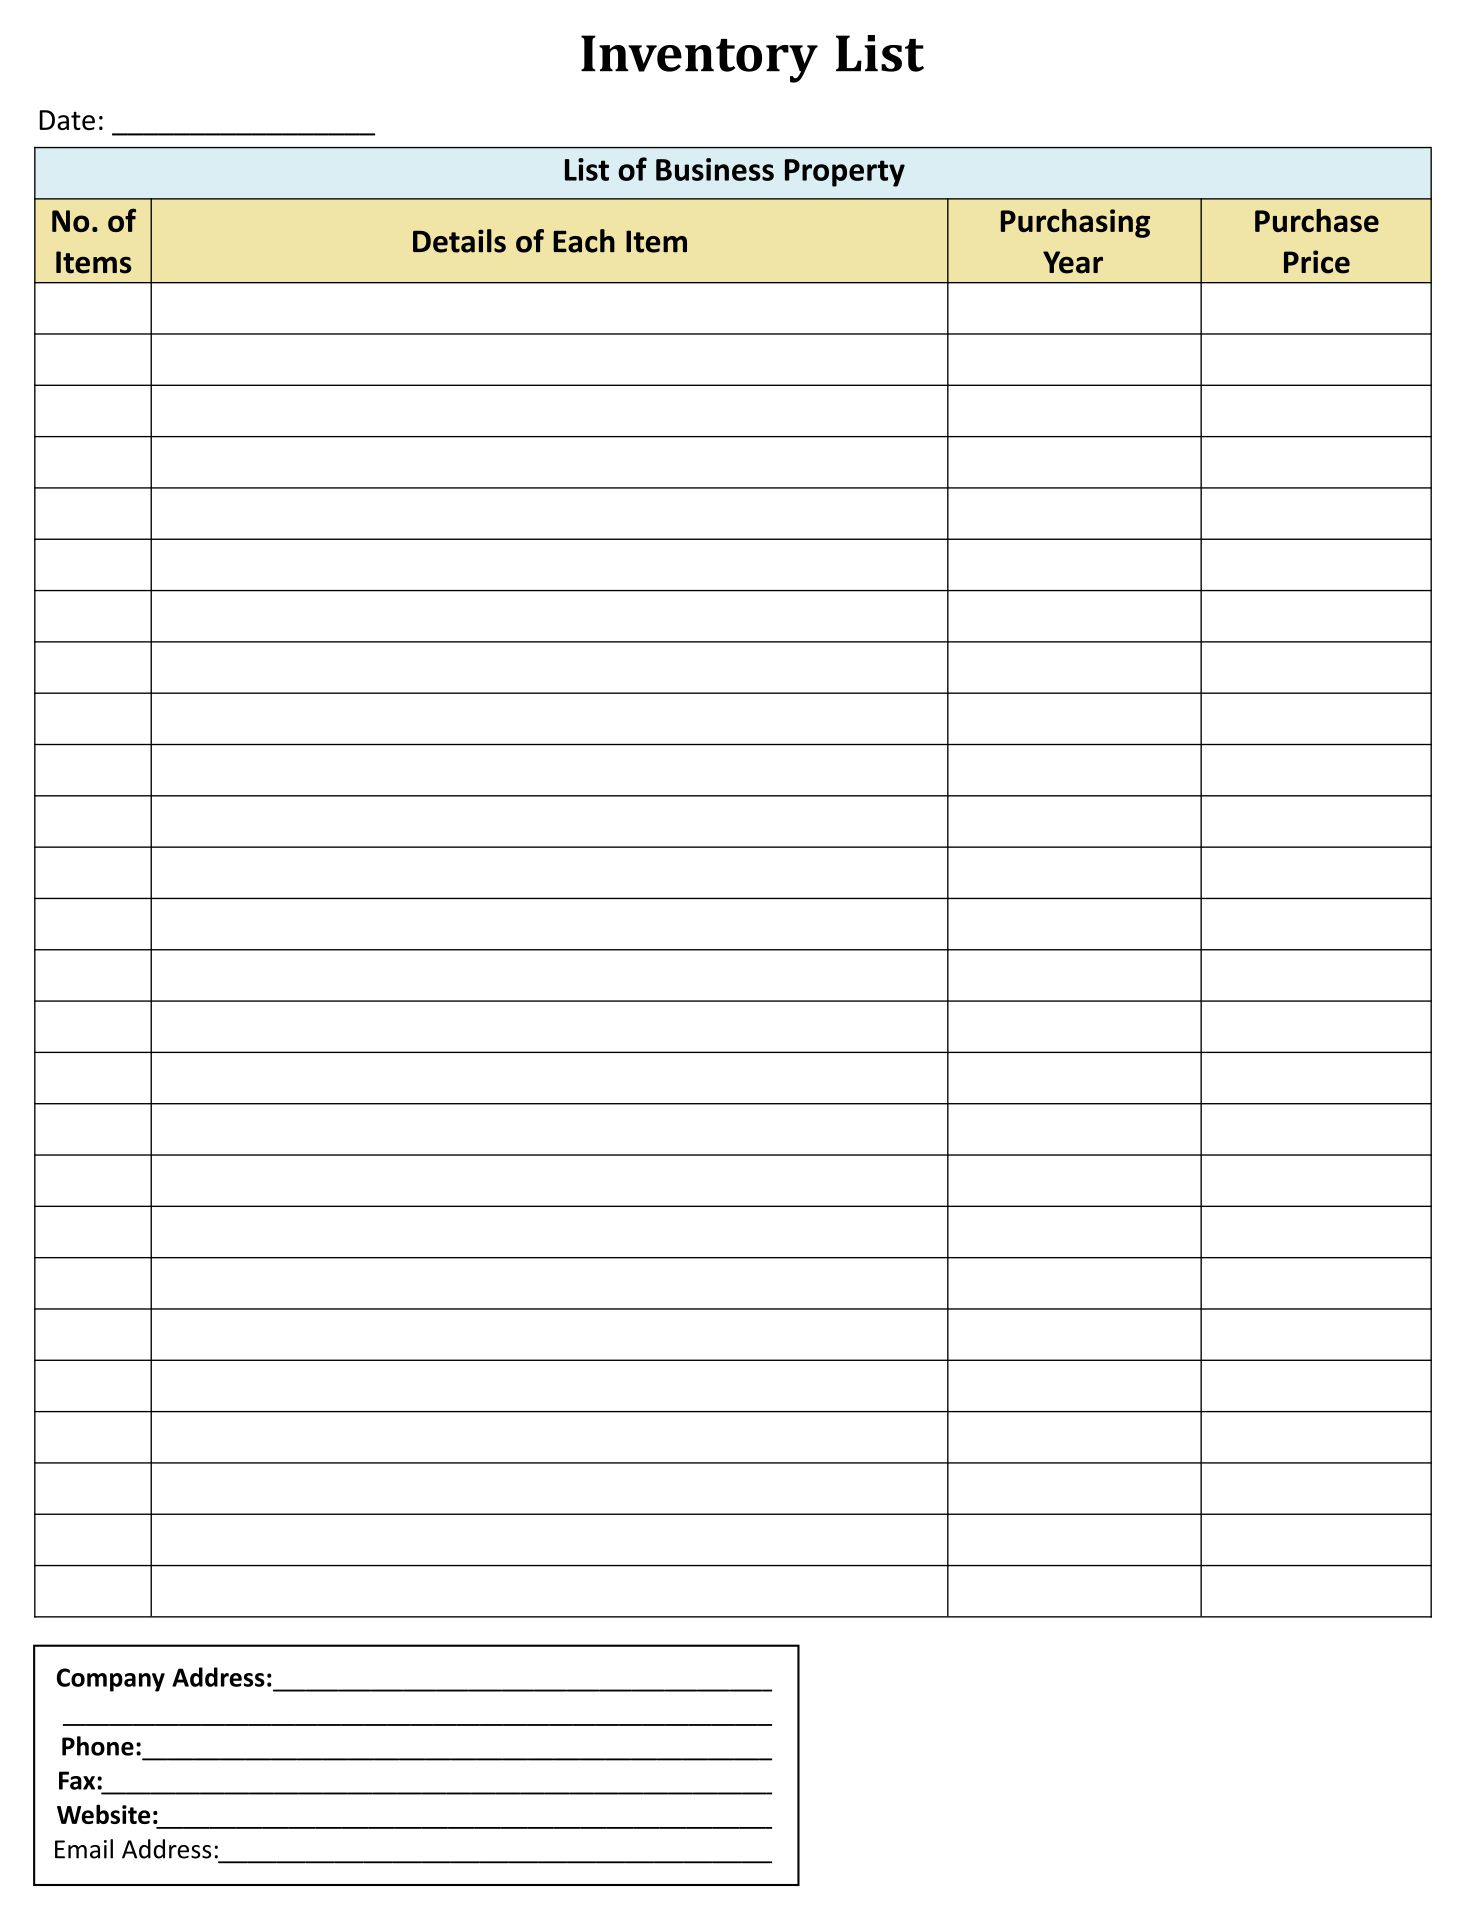 Inventory Sheet Free intended for Free Printable Inventory Sheets Business